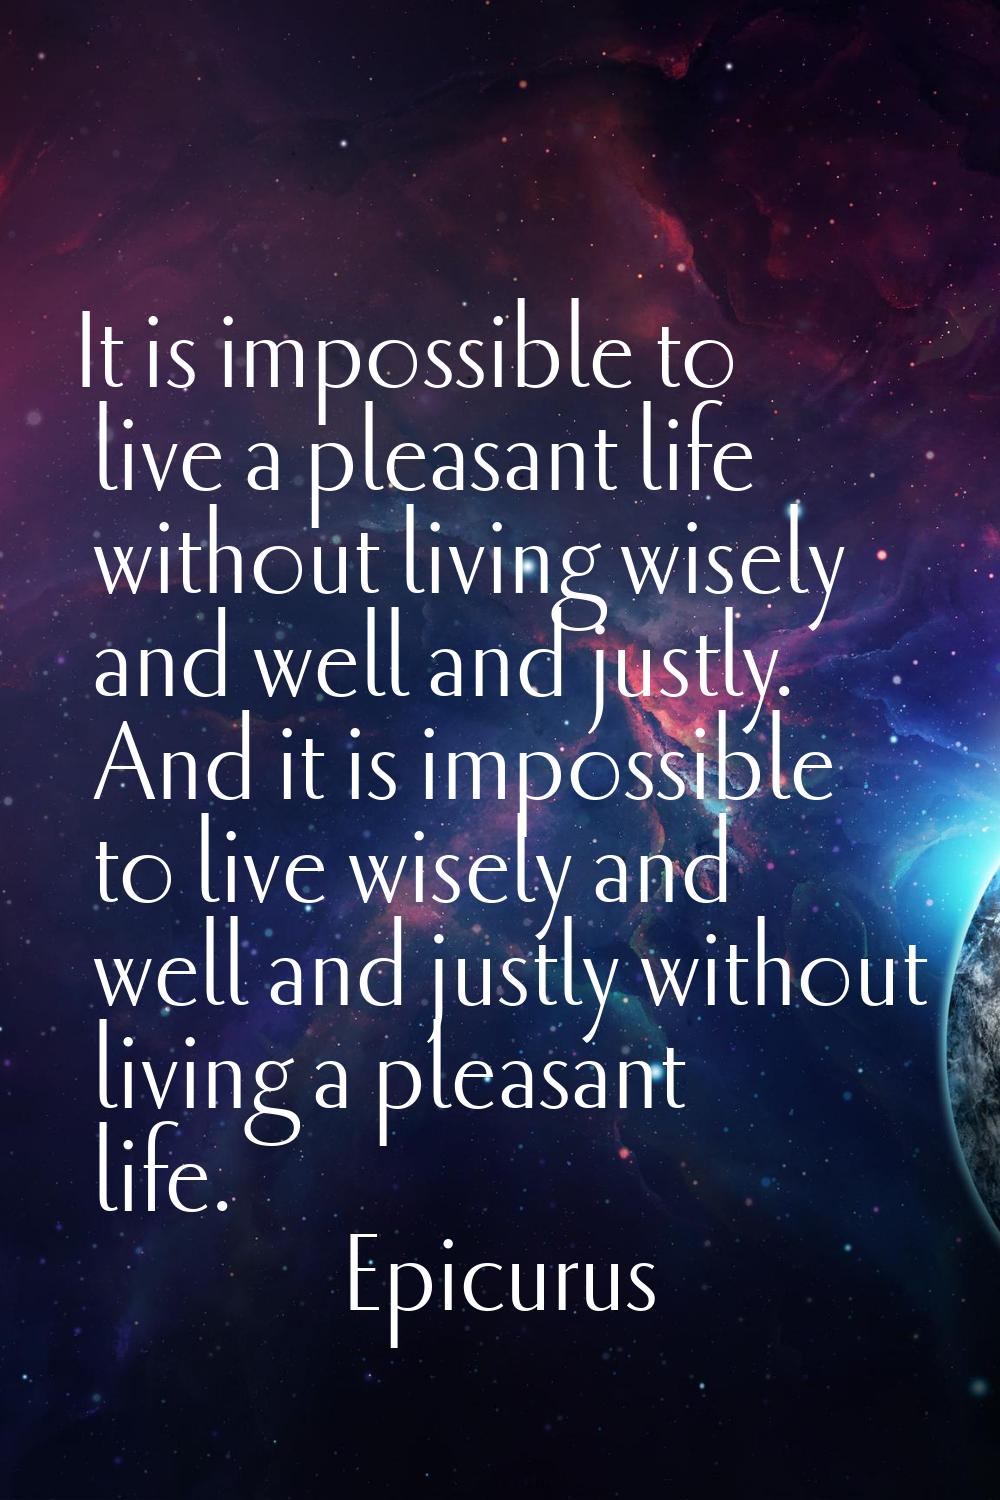 It is impossible to live a pleasant life without living wisely and well and justly. And it is impos